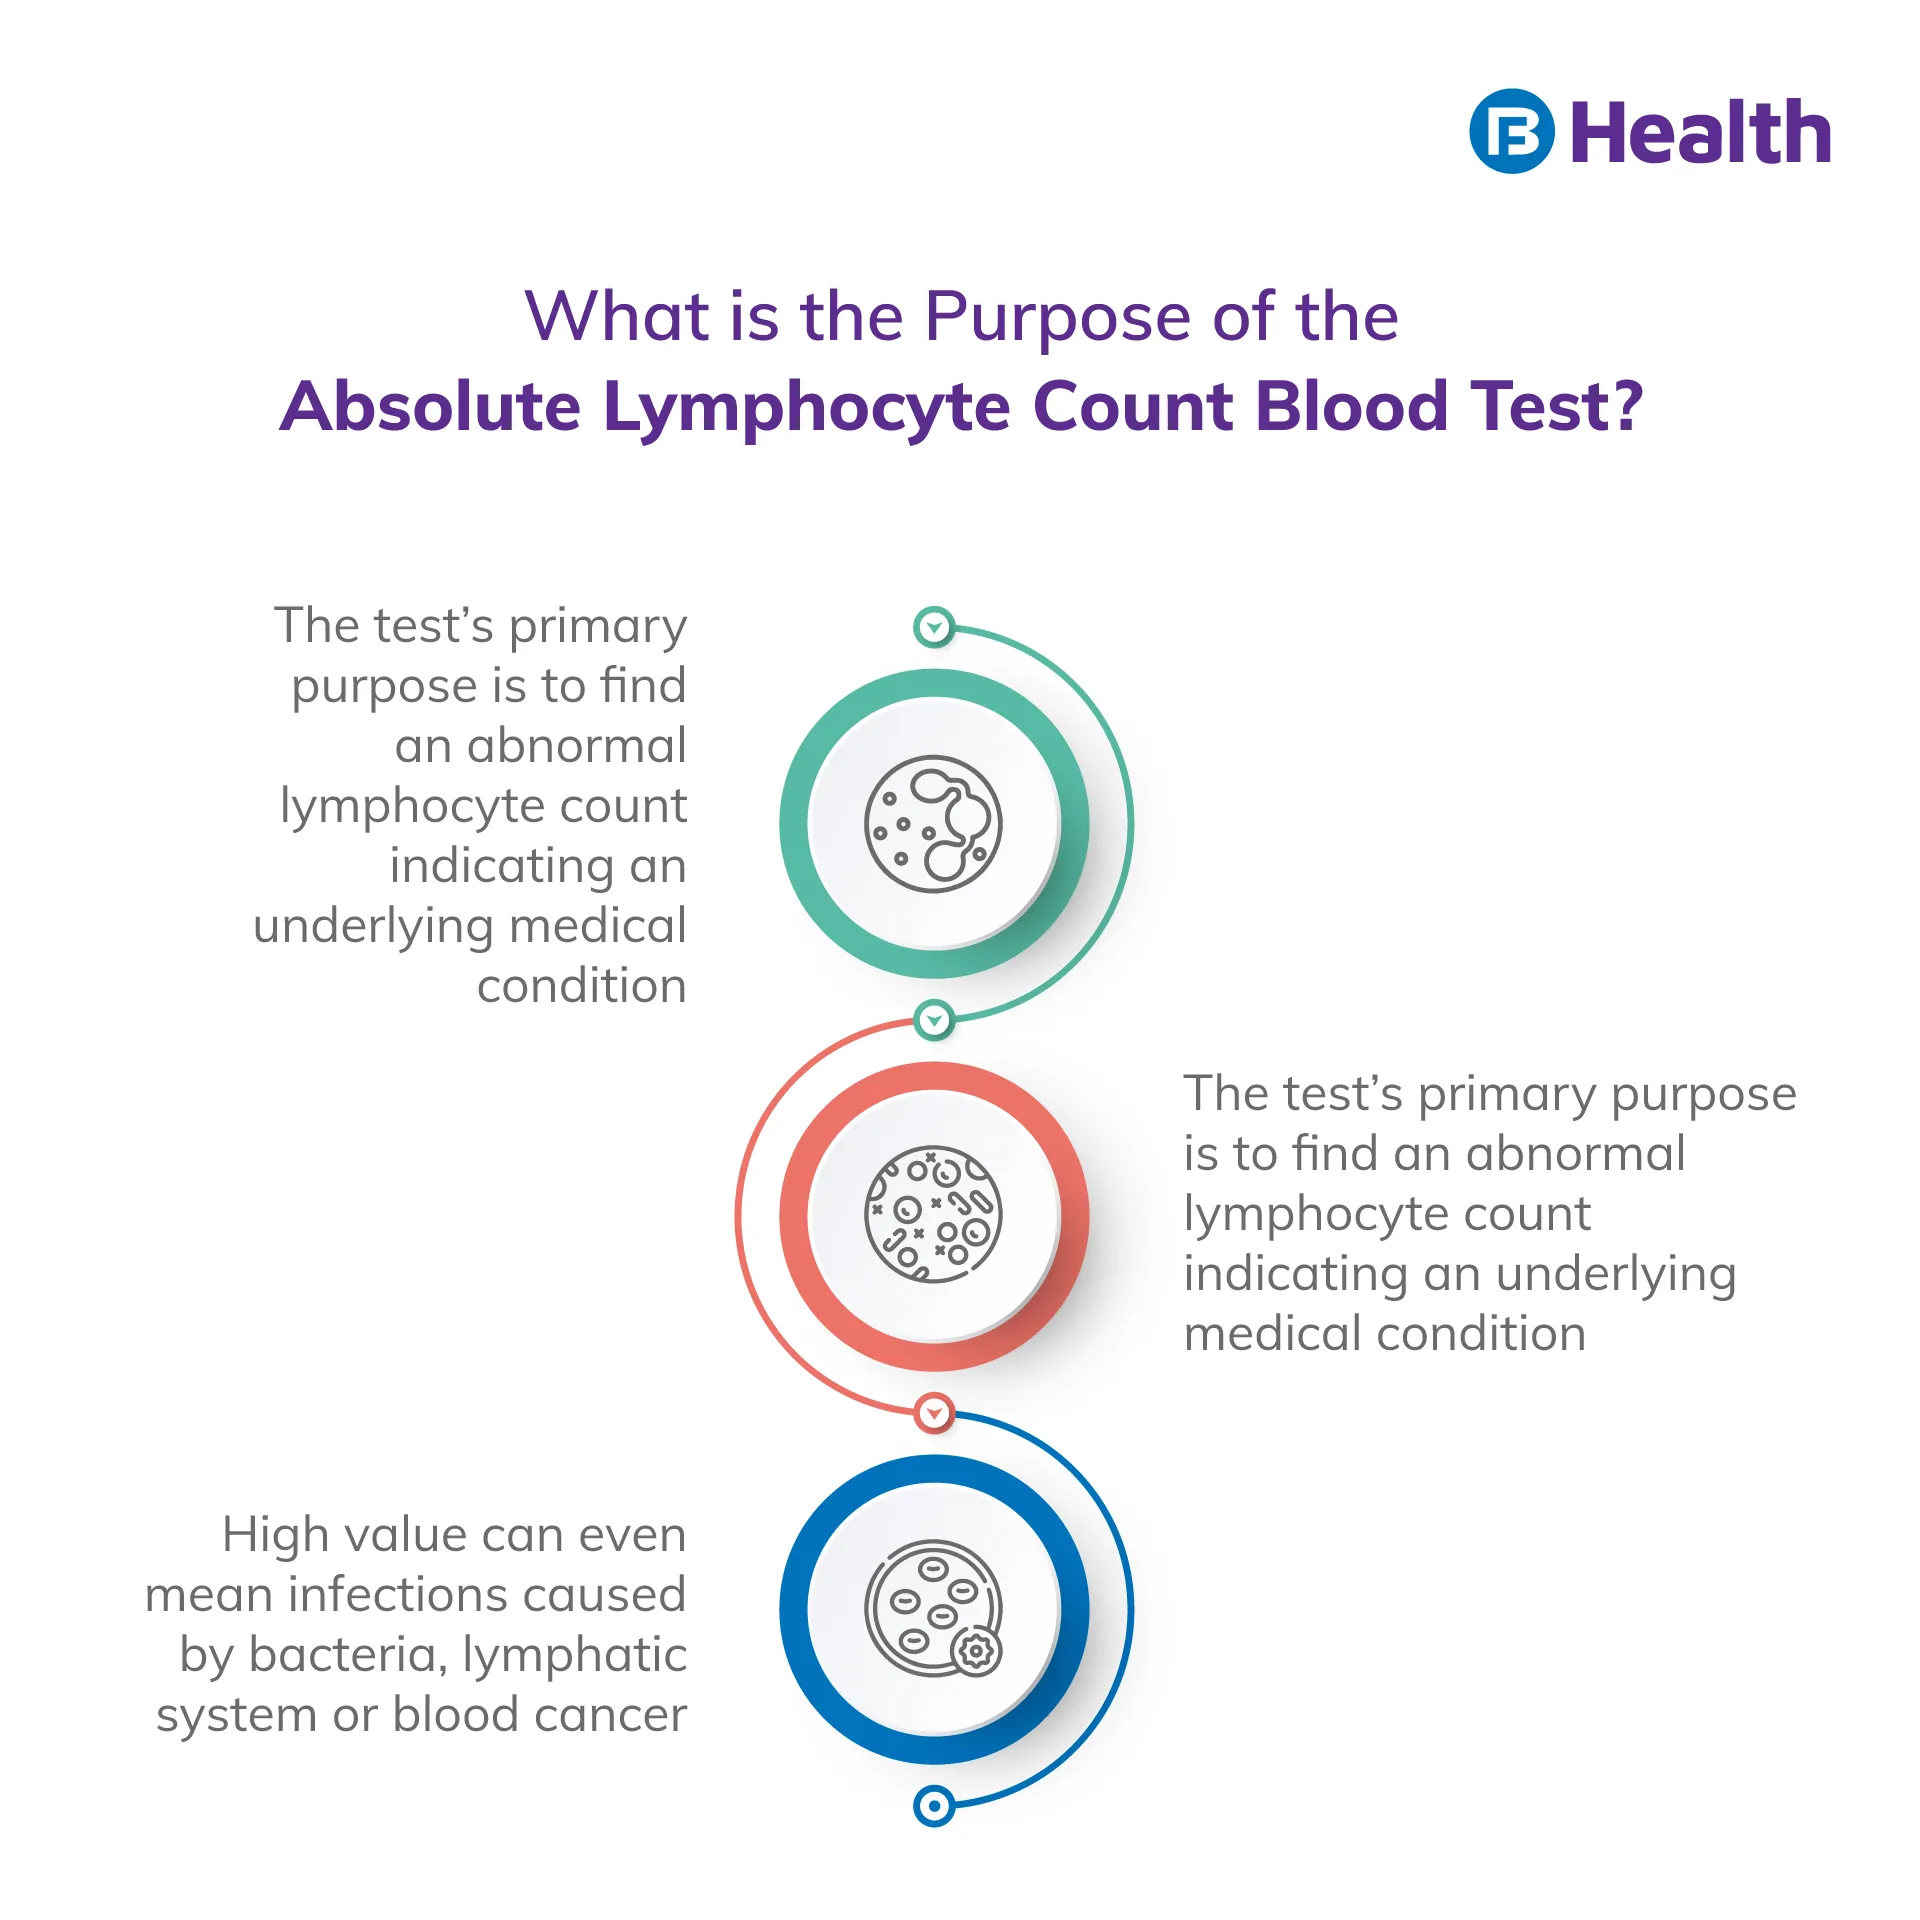 Absolute Lymphocyte Count blood test purpose